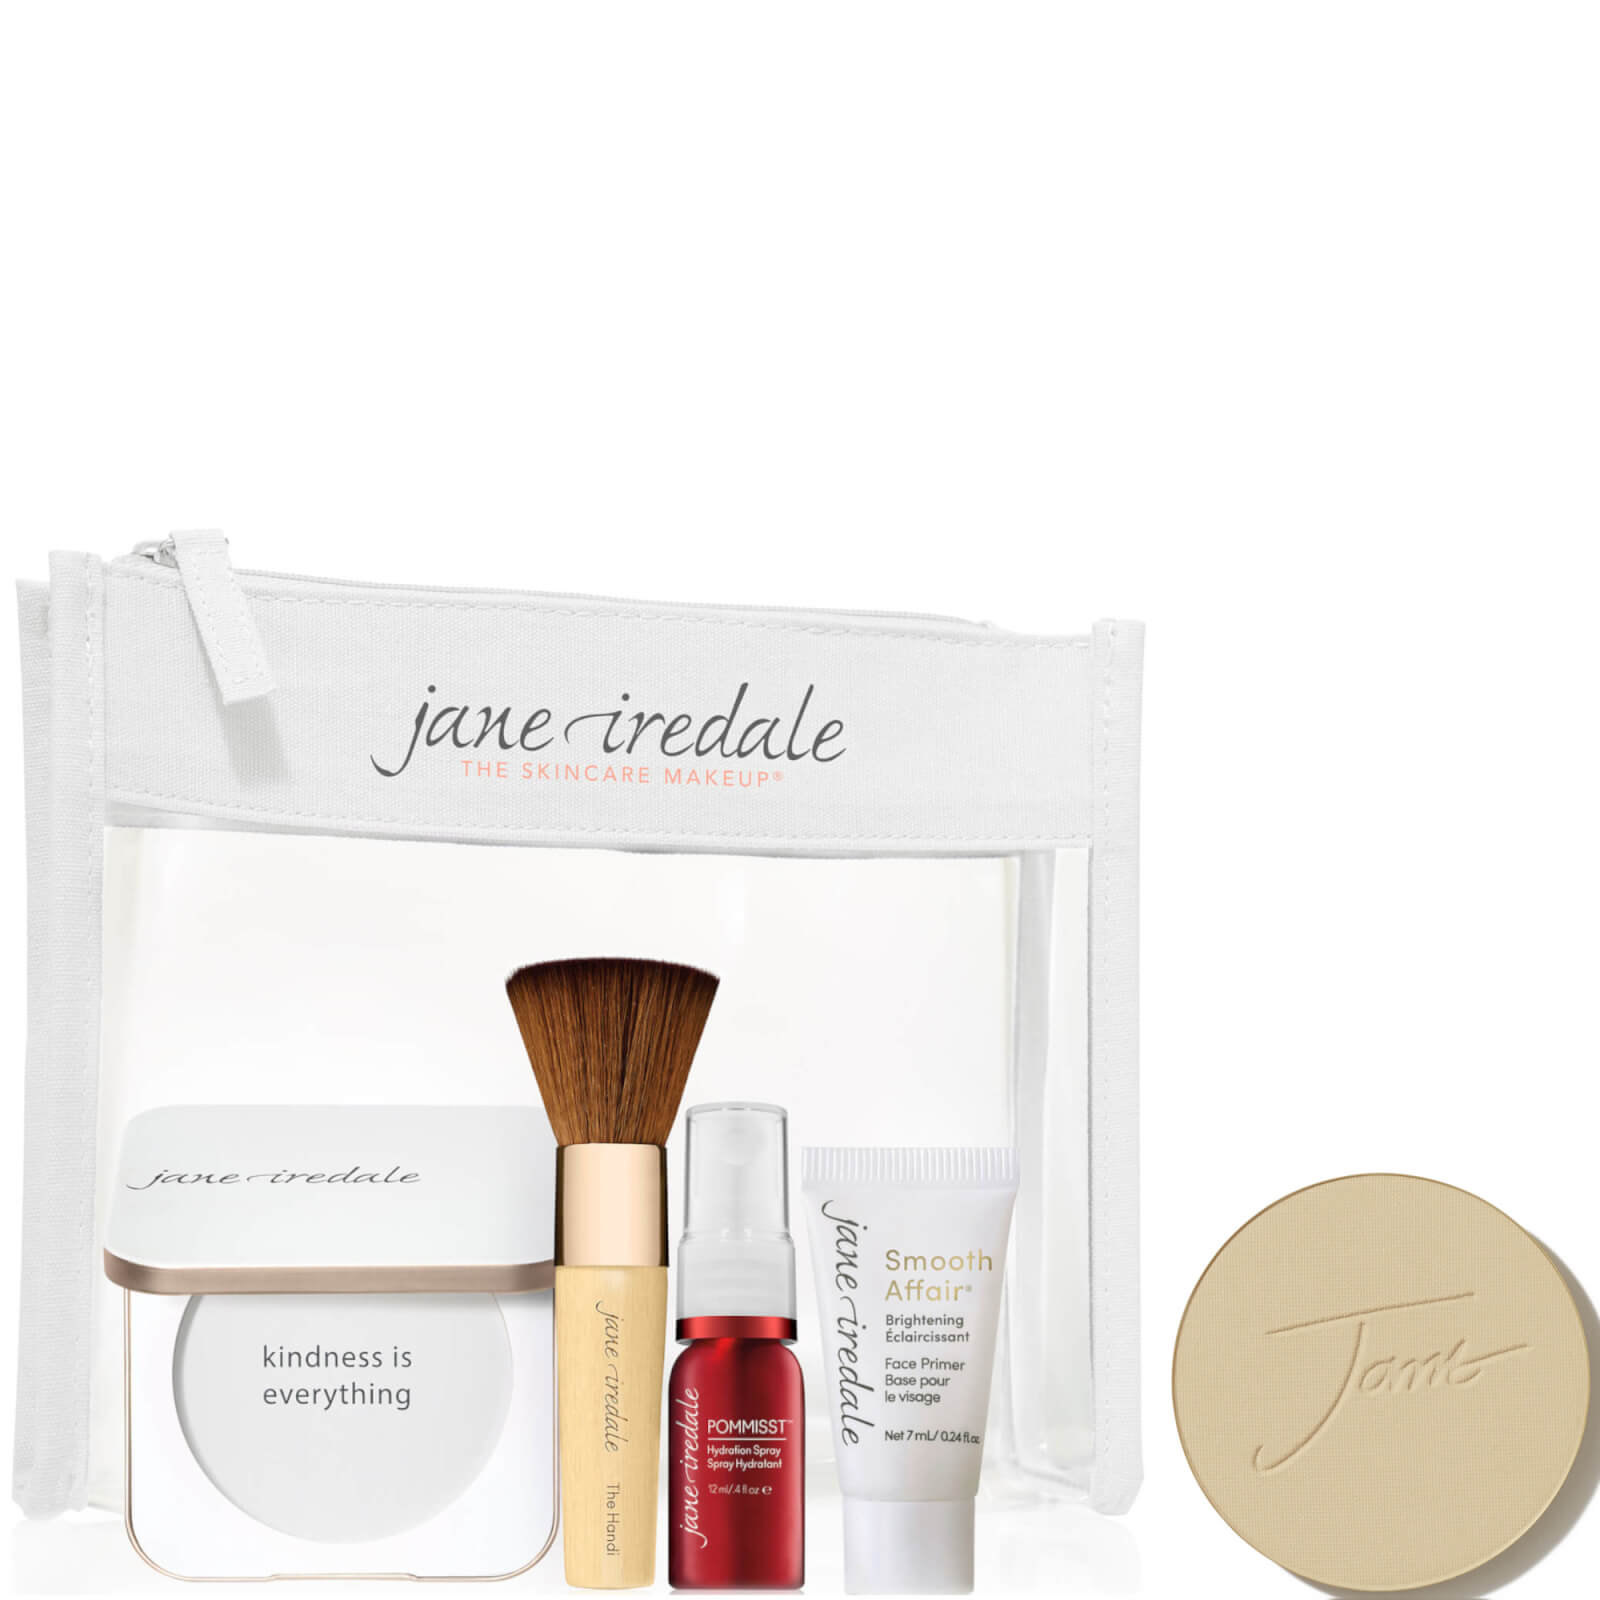 Jane Iredale The Skincare Makeup System Essentials And Purepressed Mineral Foundation Bundle (various Shades) (wo In Warm Sienna